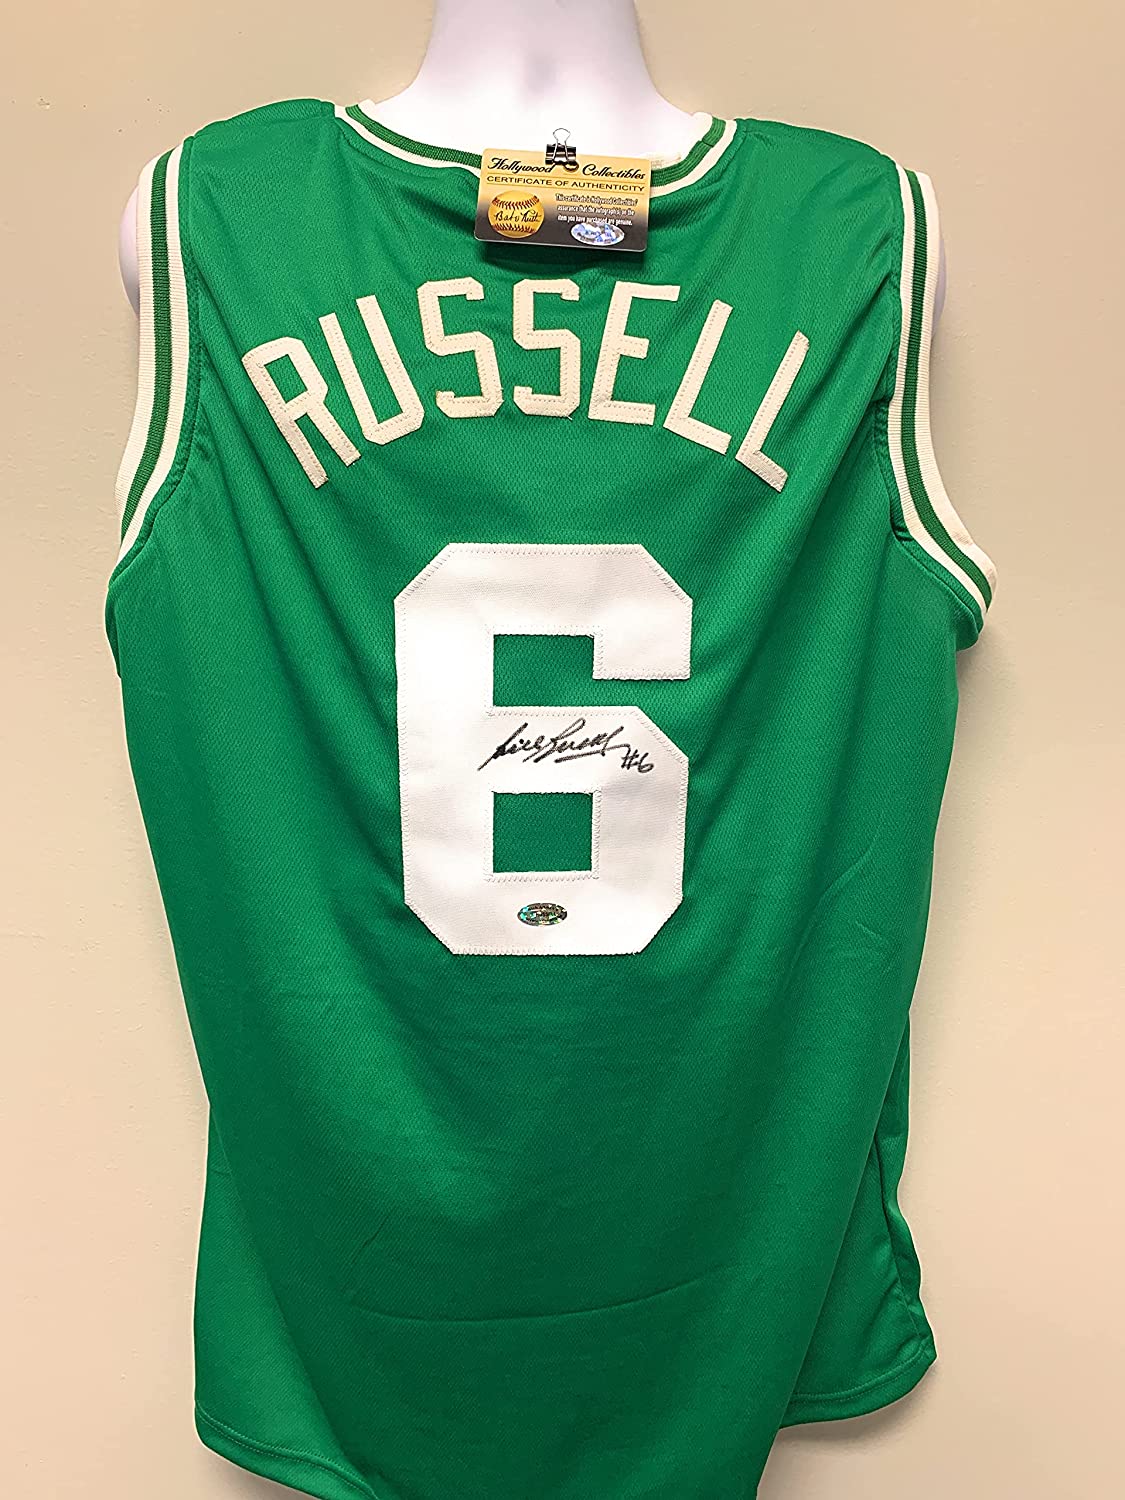 signed bill russell jersey